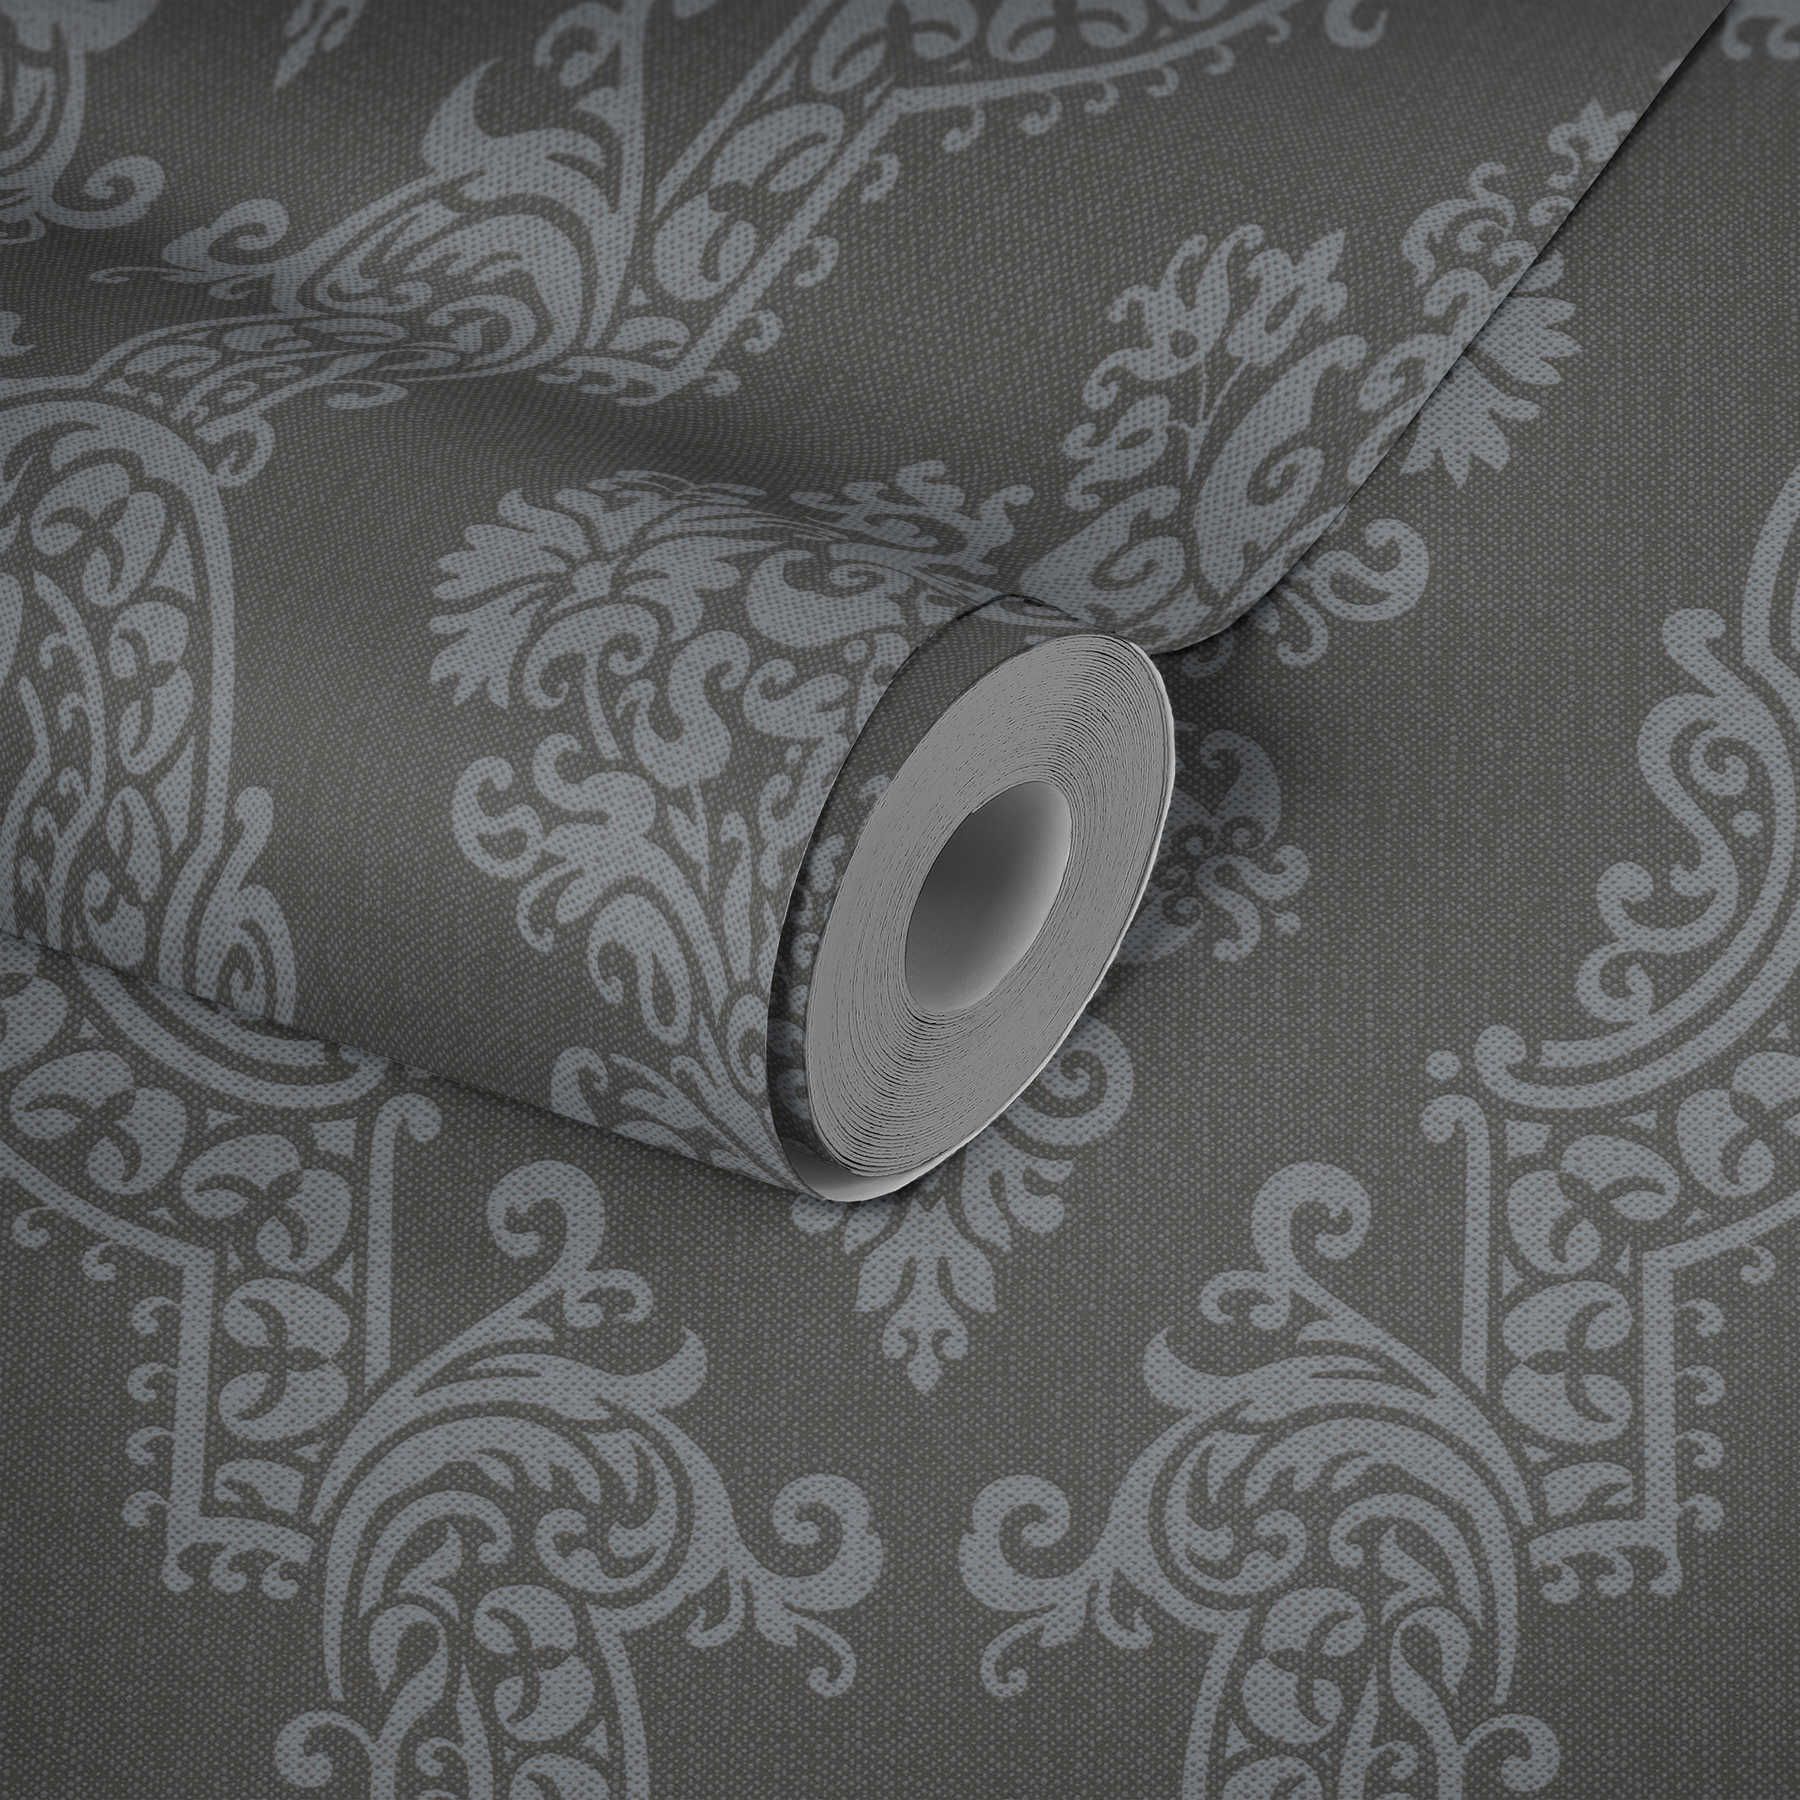             Classic ornament wallpaper with floral pattern - grey
        